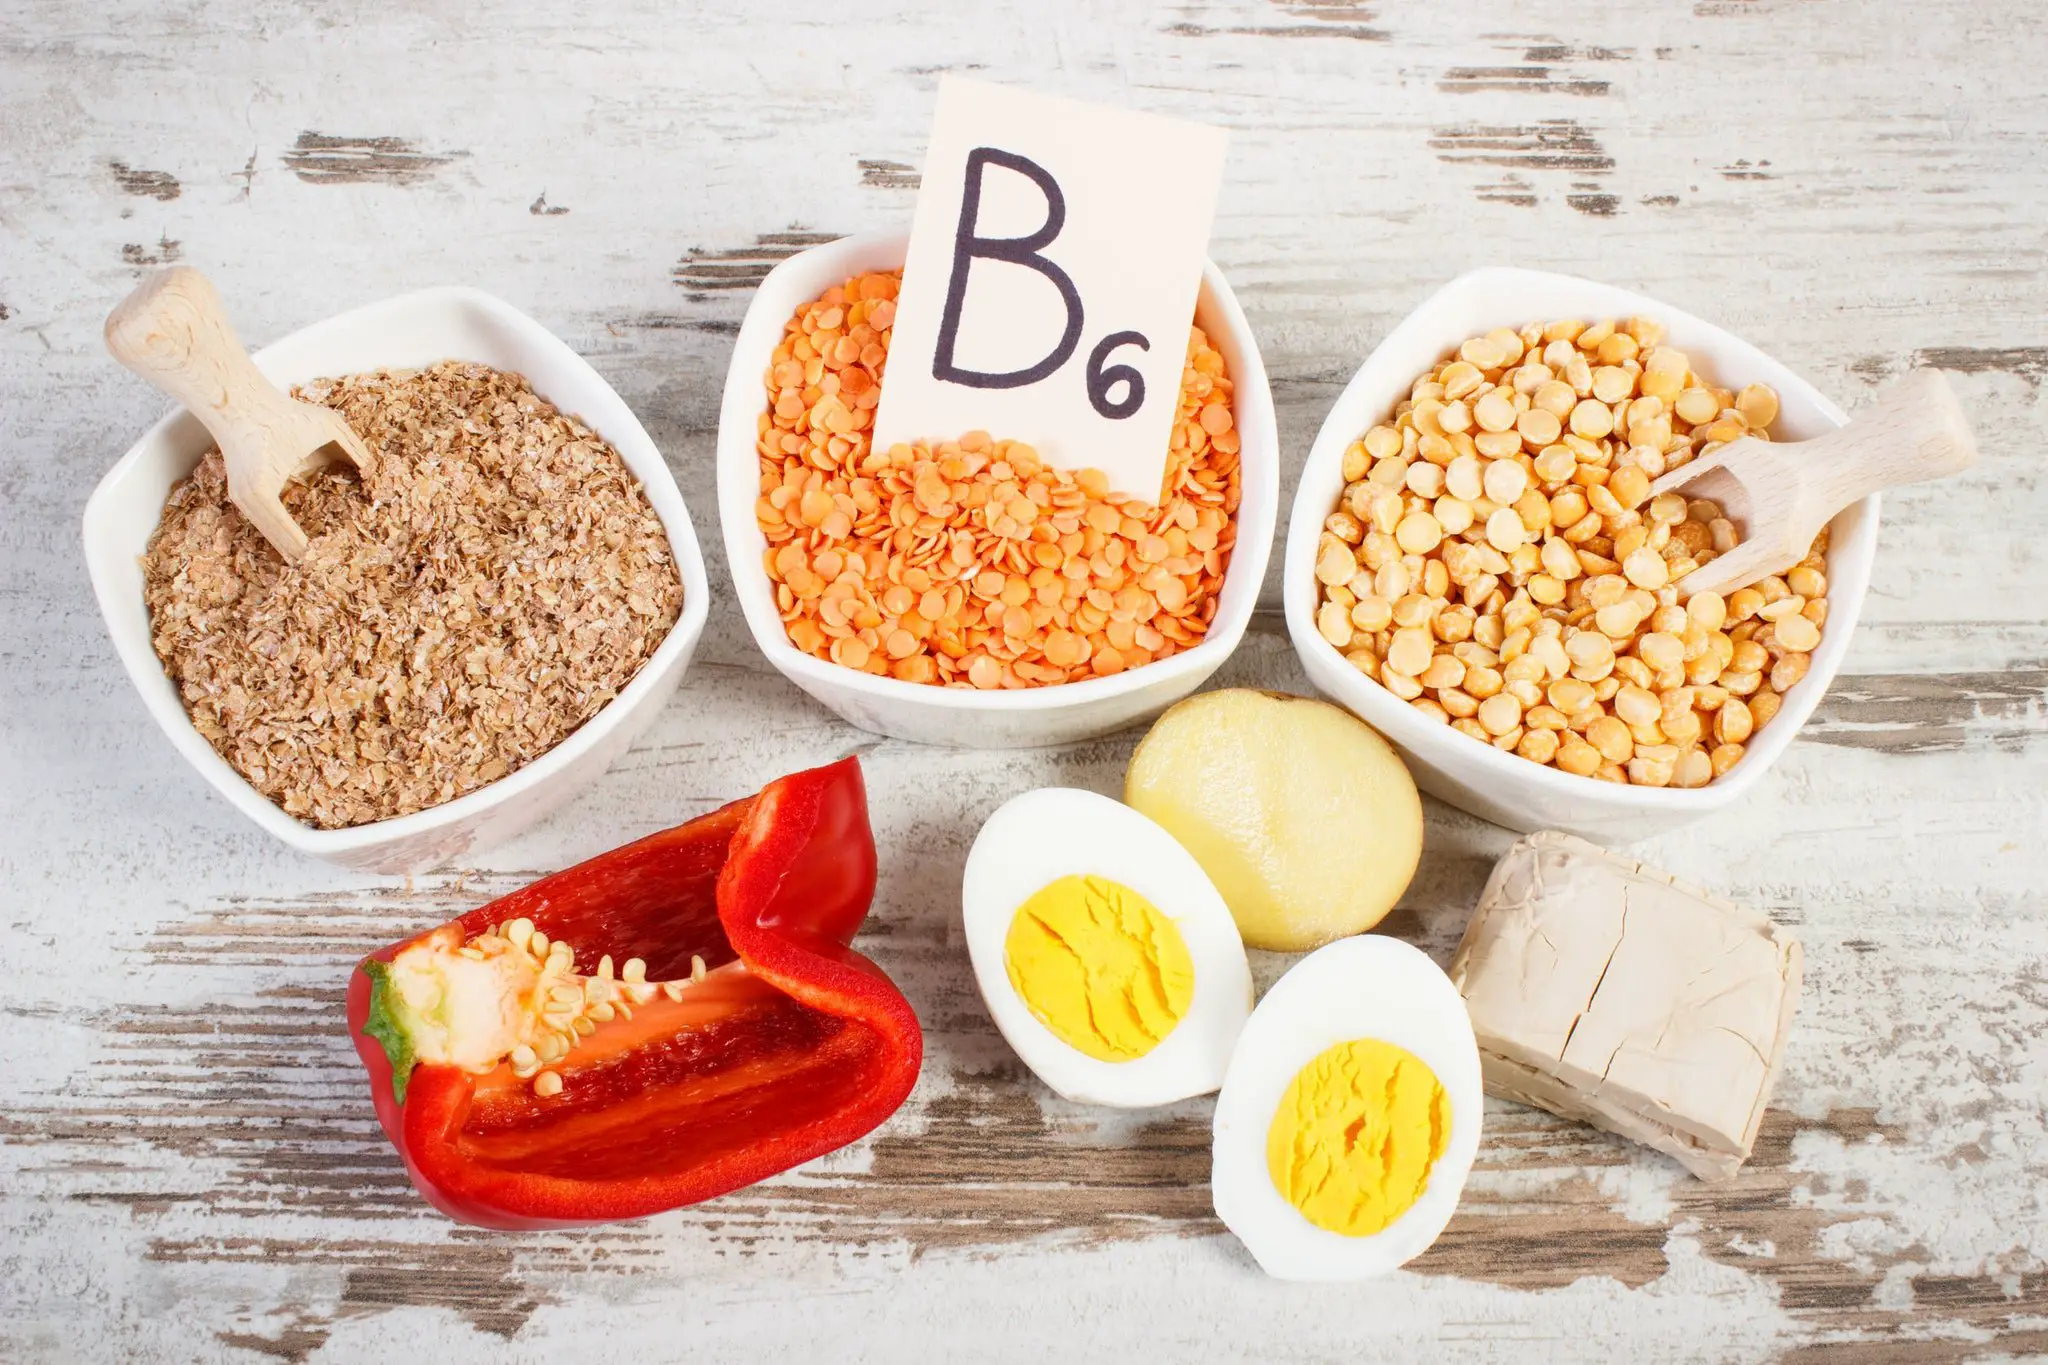 What is Vitamin B6?